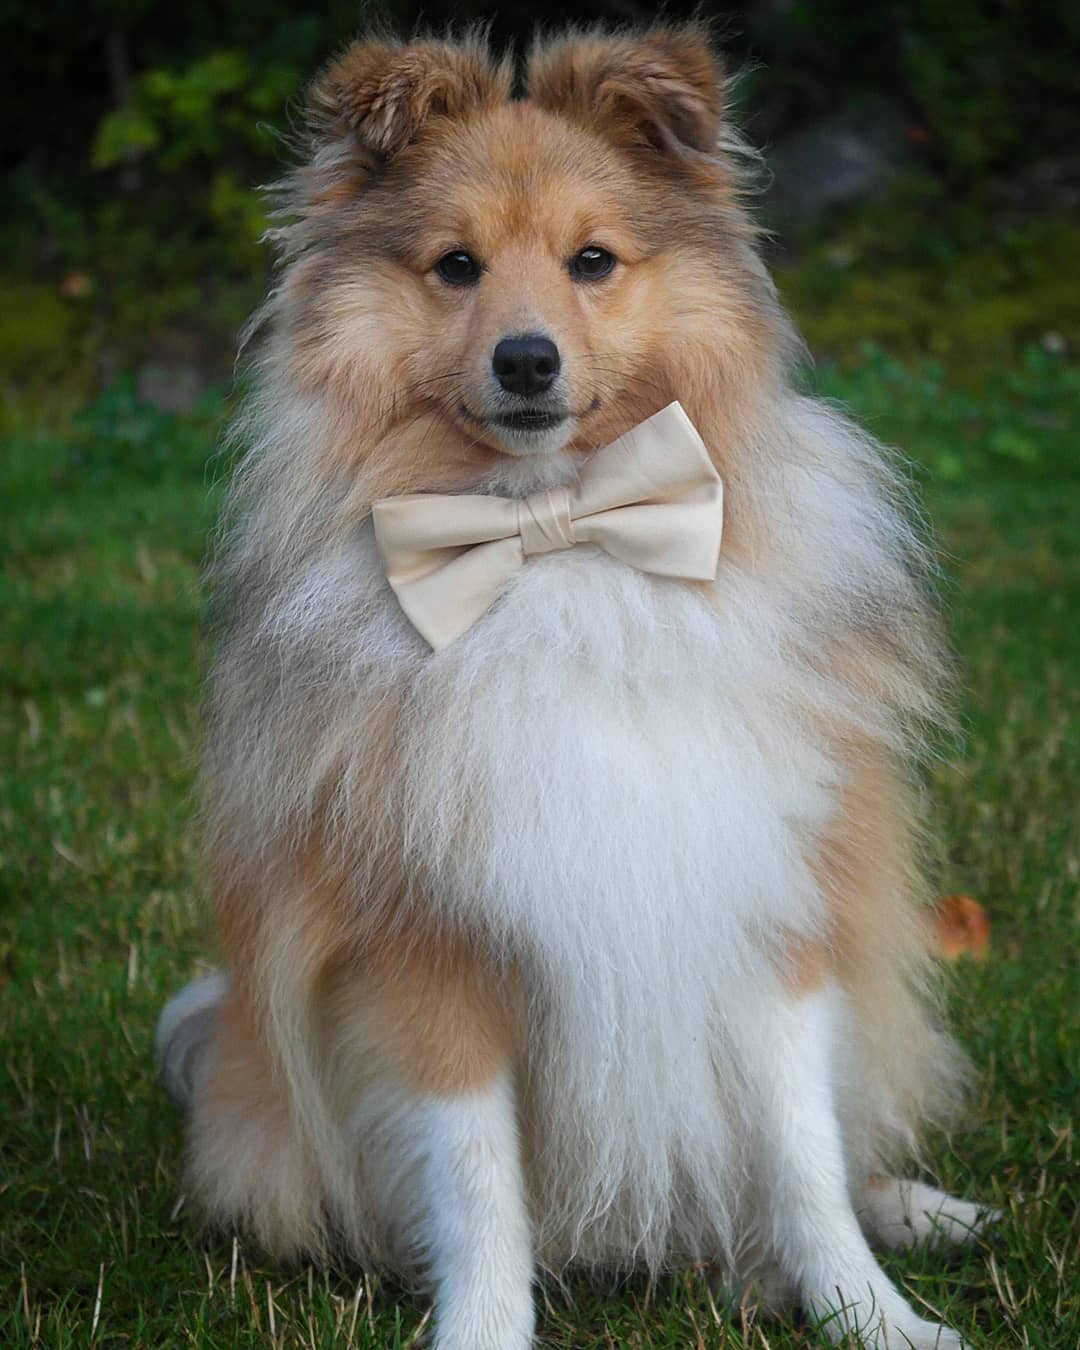 A Sheltie wearing a large bow tie while sitting on the grass